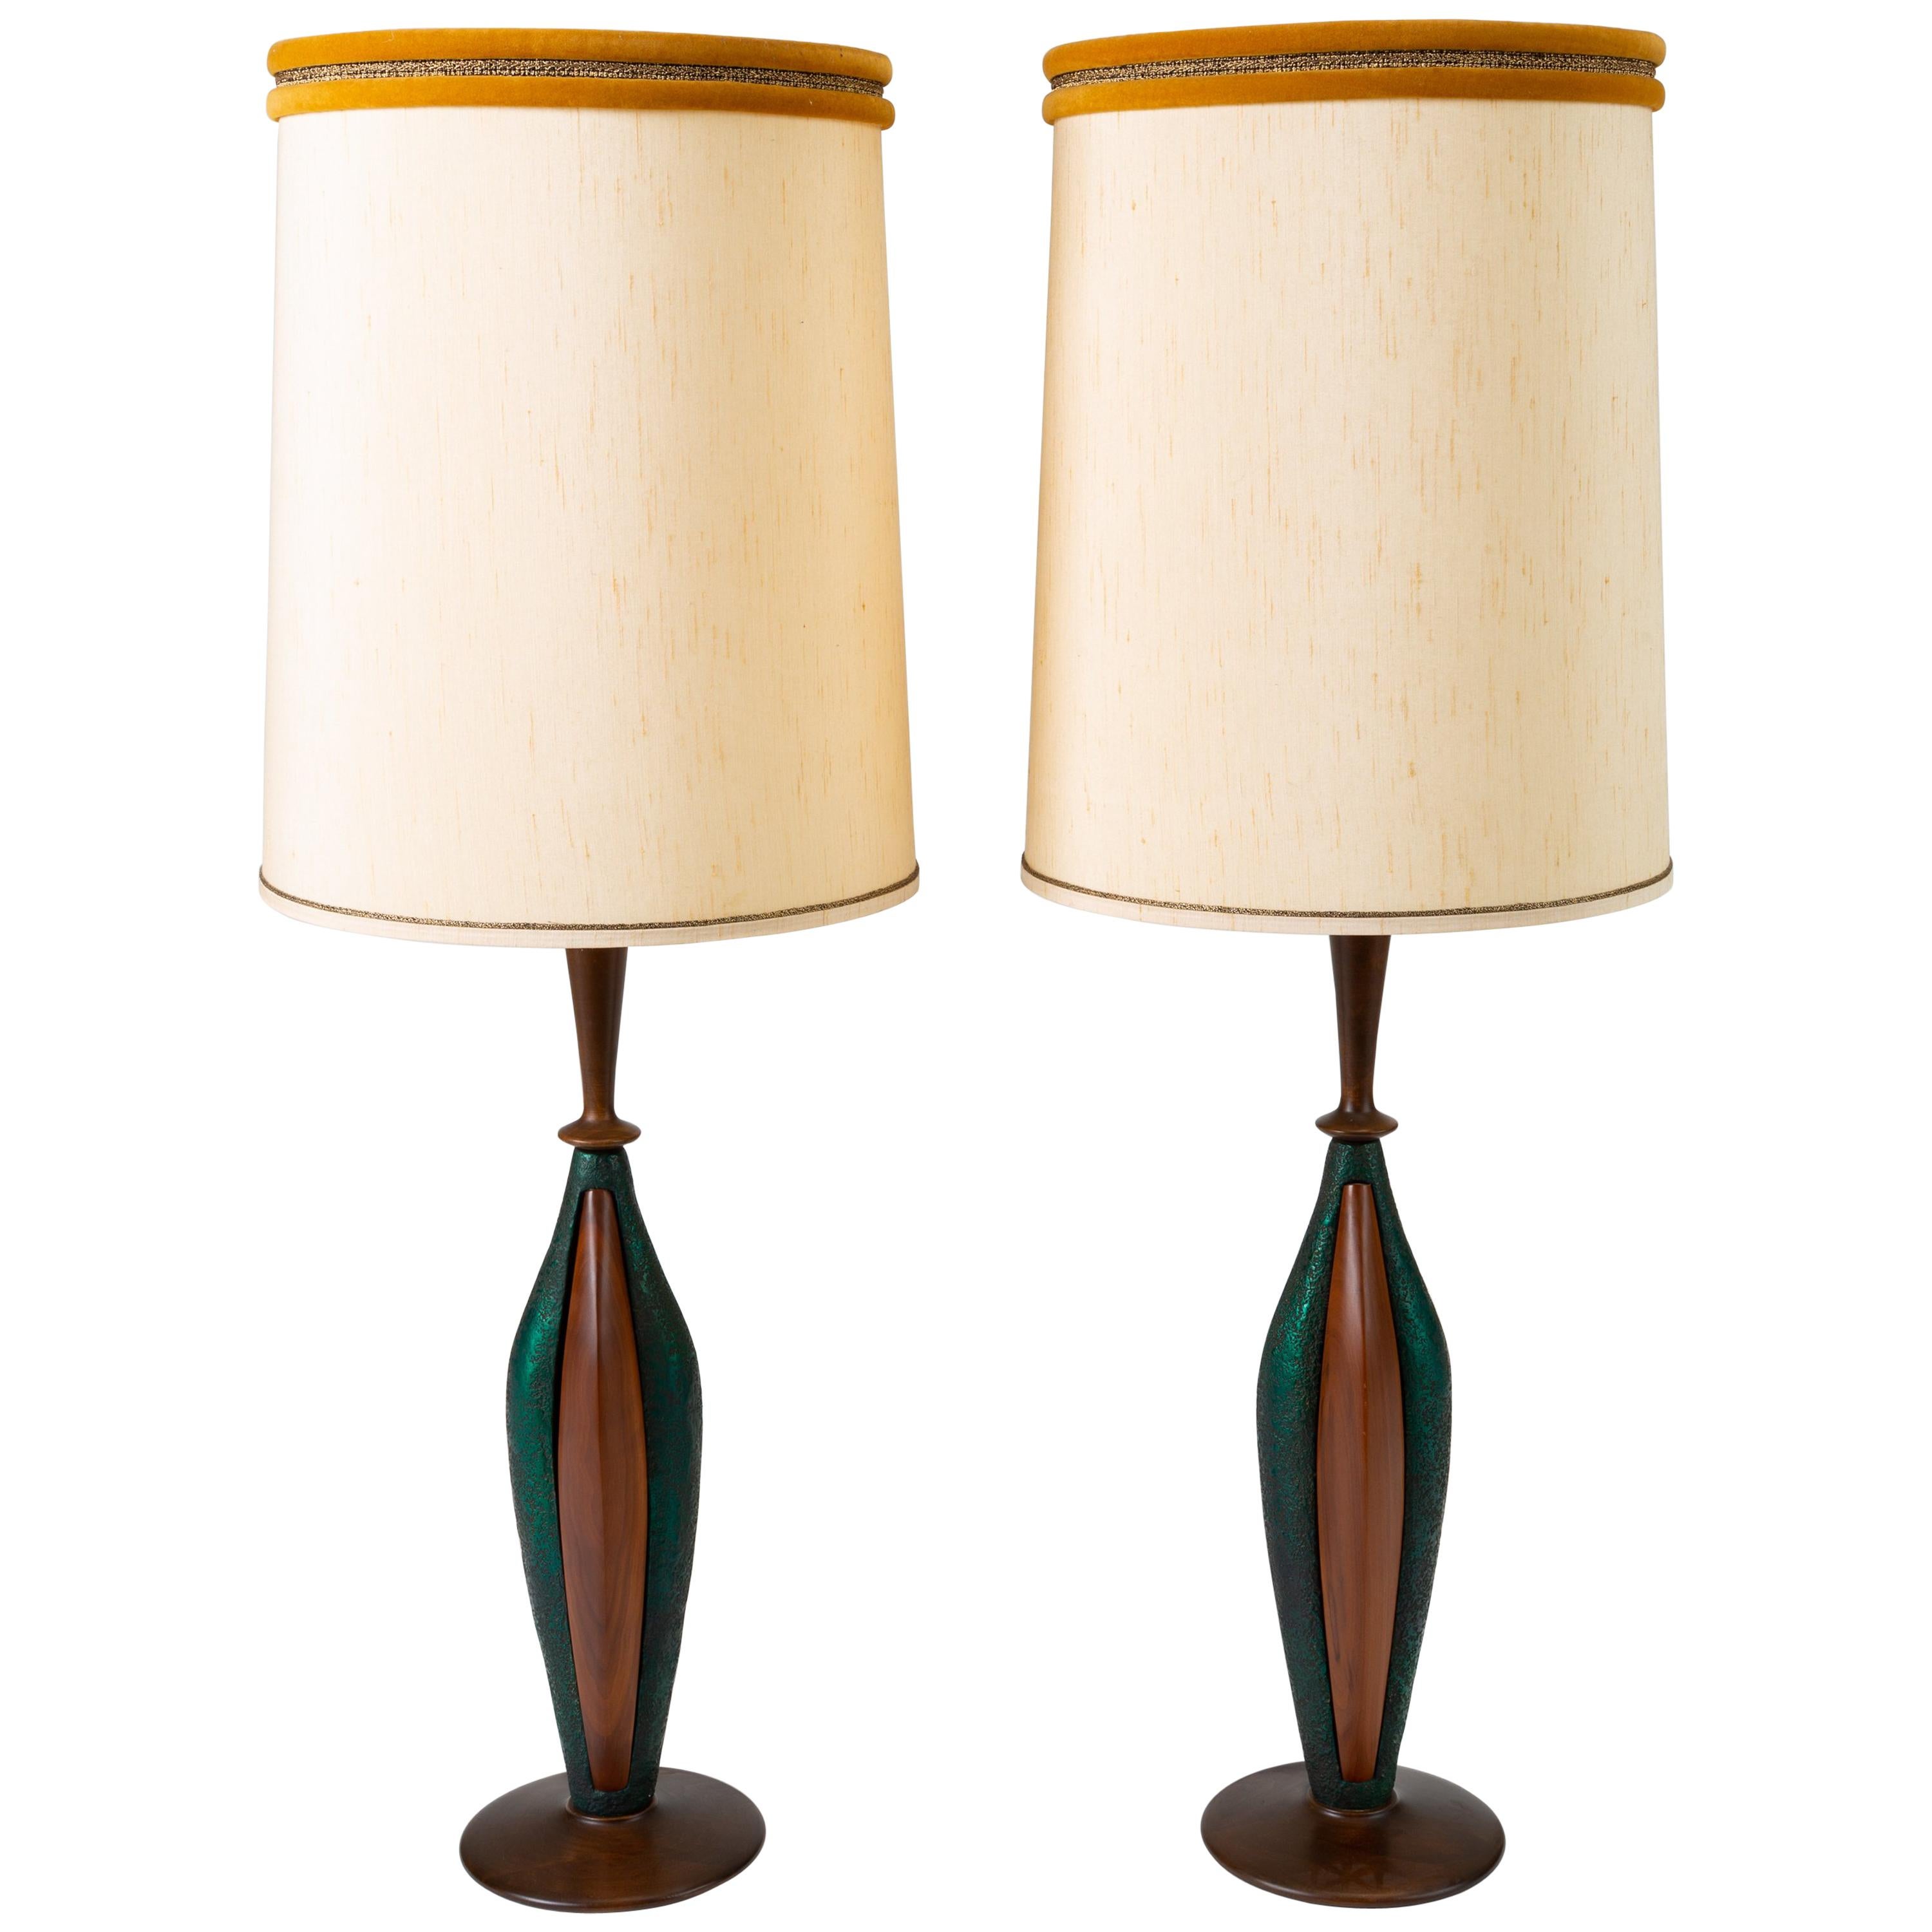 Pair of Tall Table Lamps in Walnut and Resin by Moderna